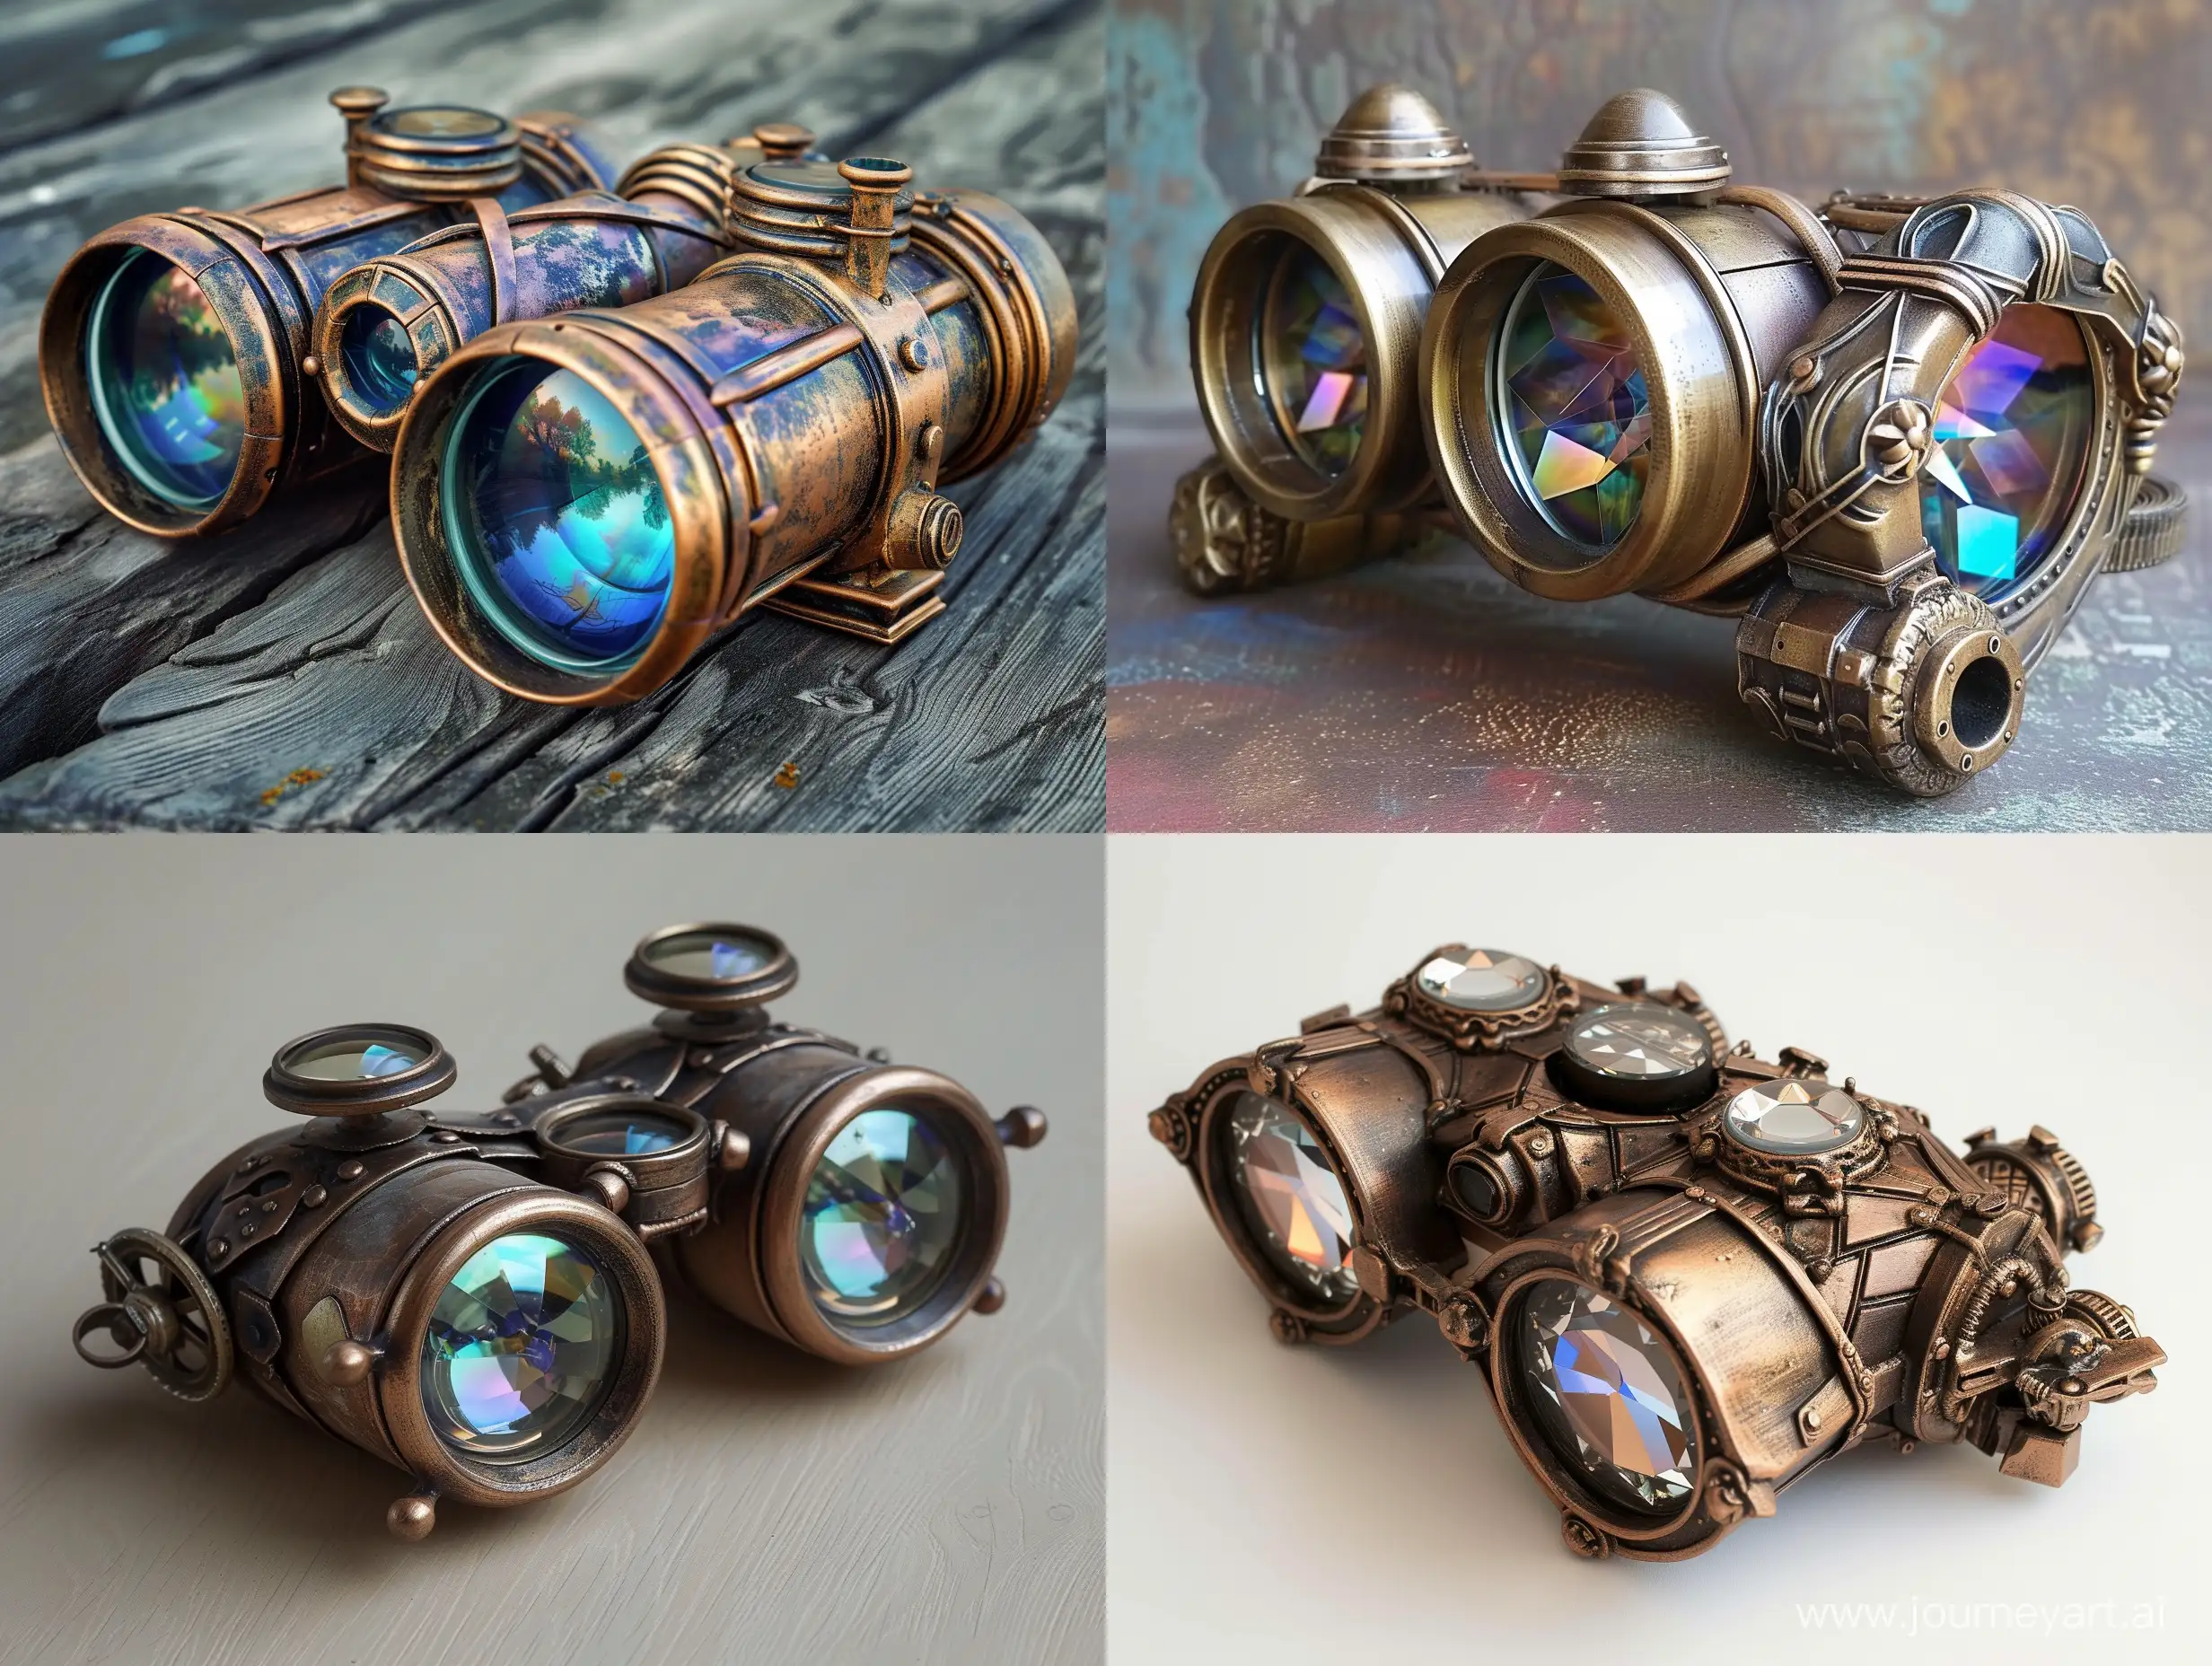 Bronze-Steampunk-Kaleidoscope-with-Bright-Glasses-and-Small-Details